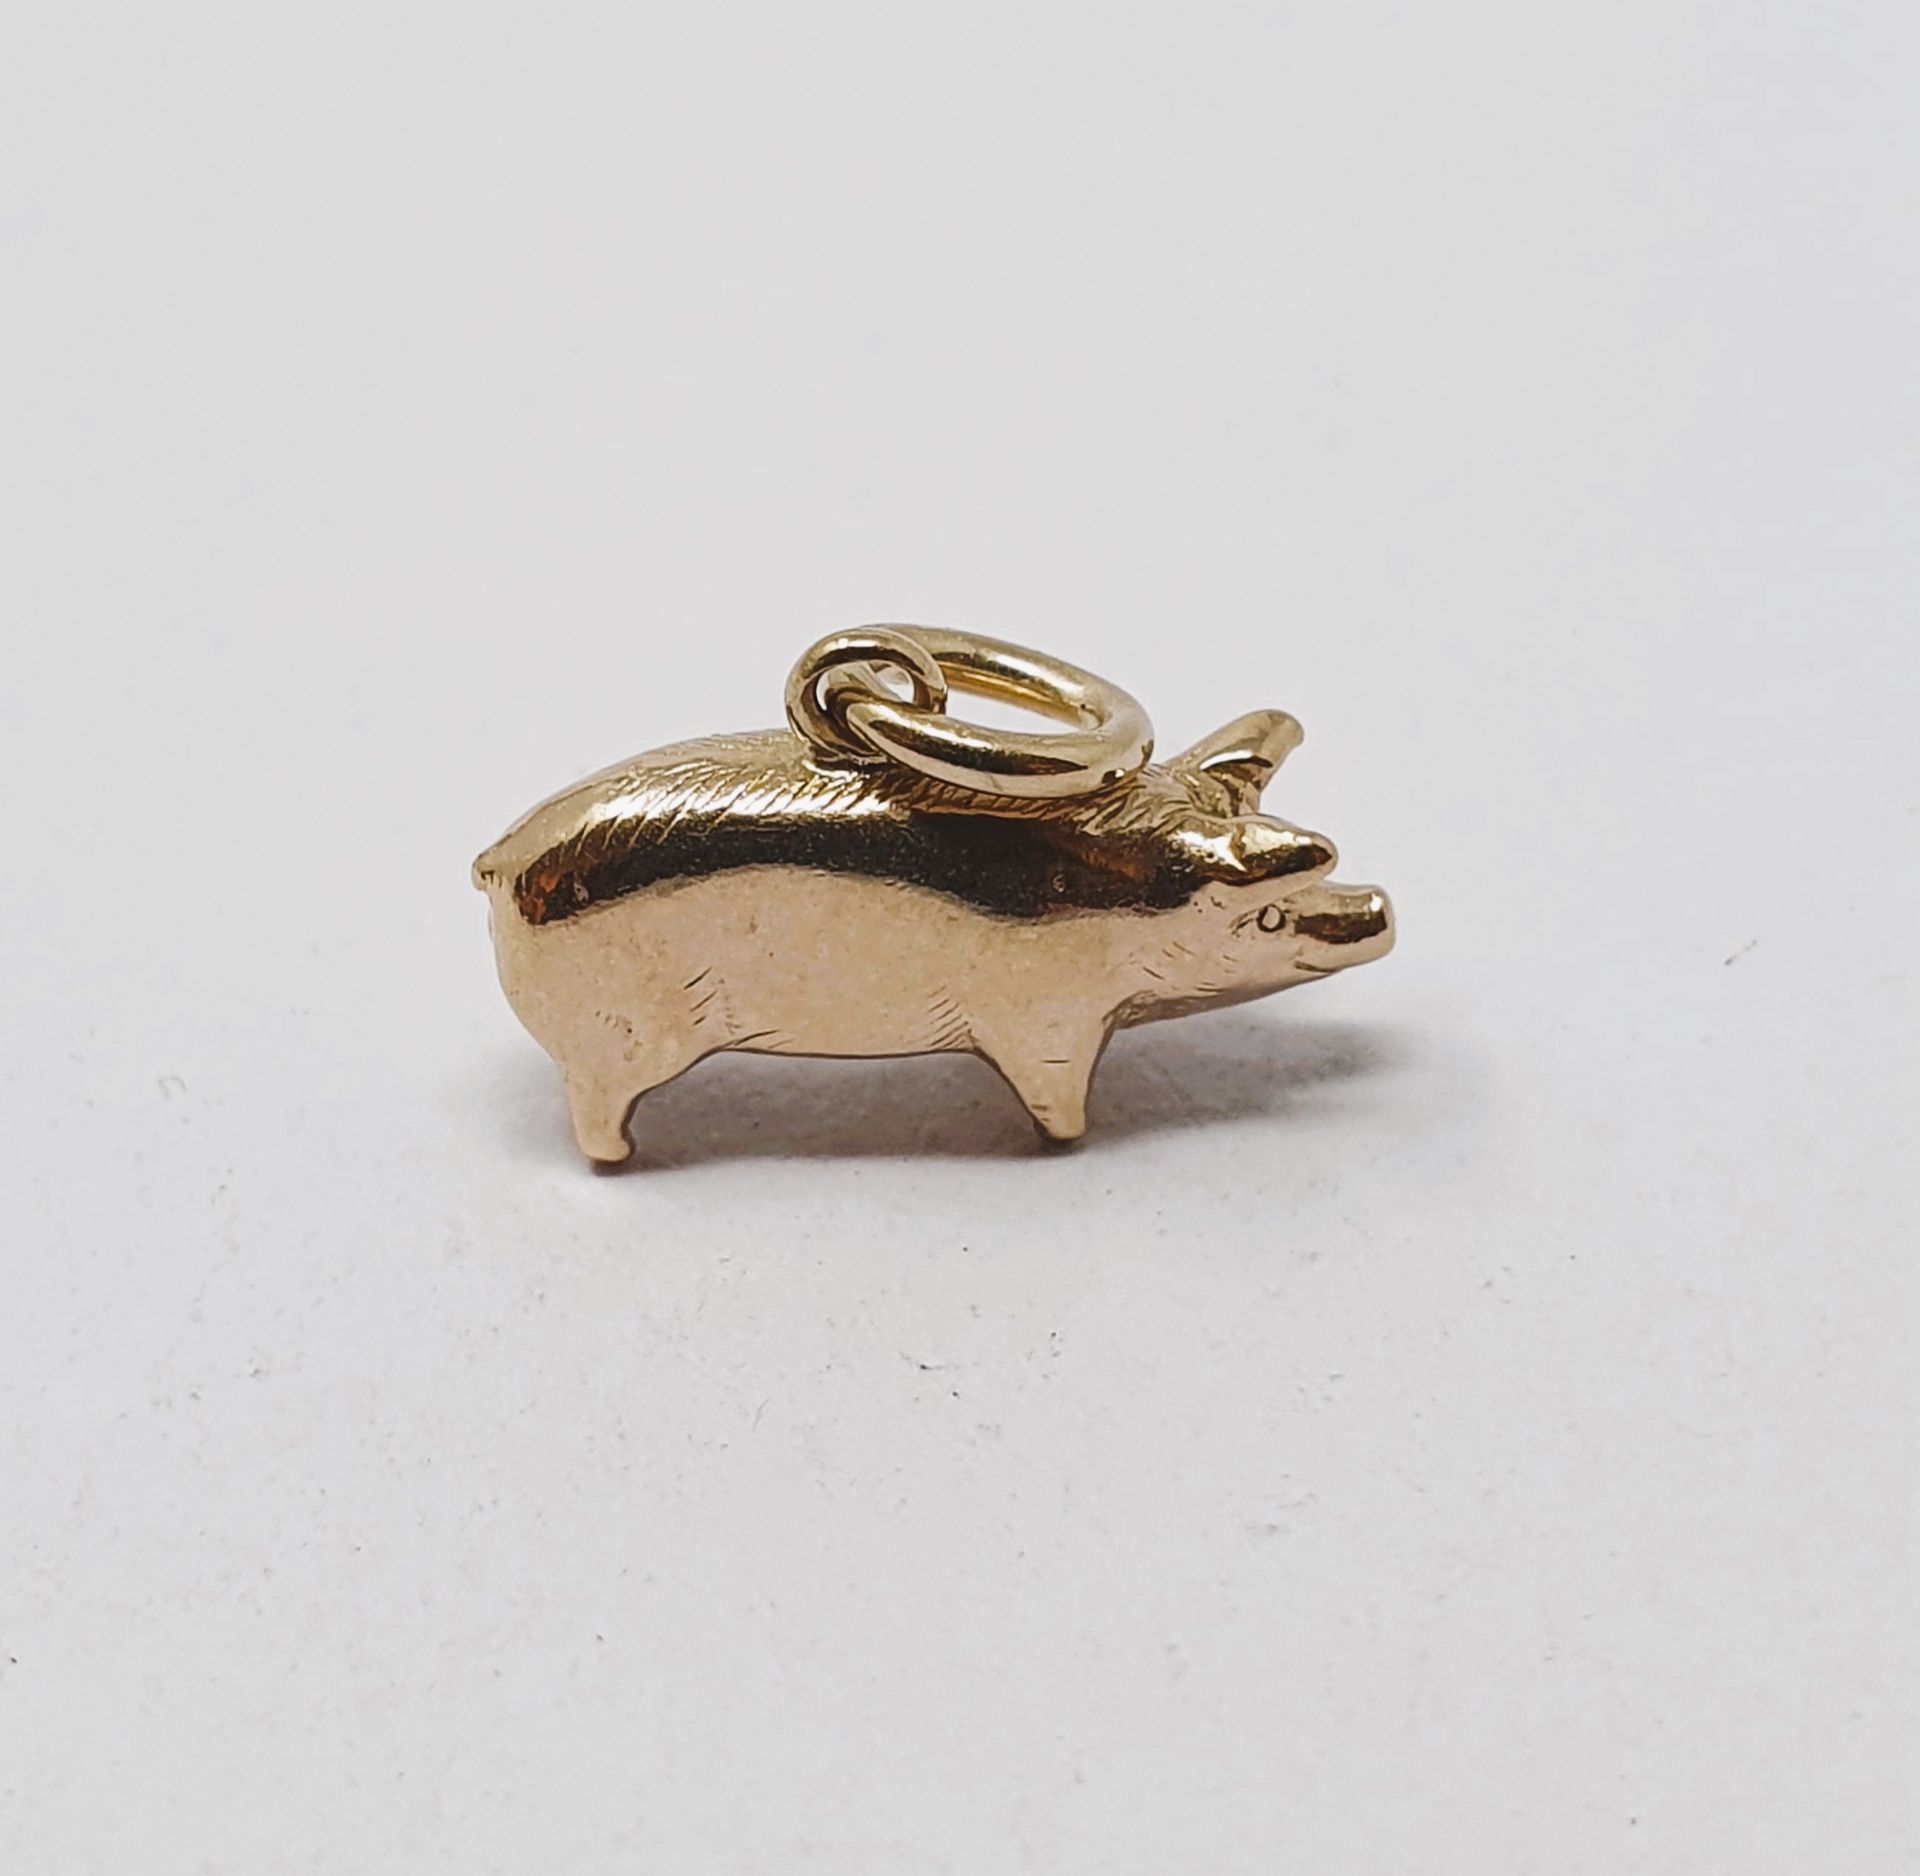 9ct gold vintage pig charm, gross weight 2.